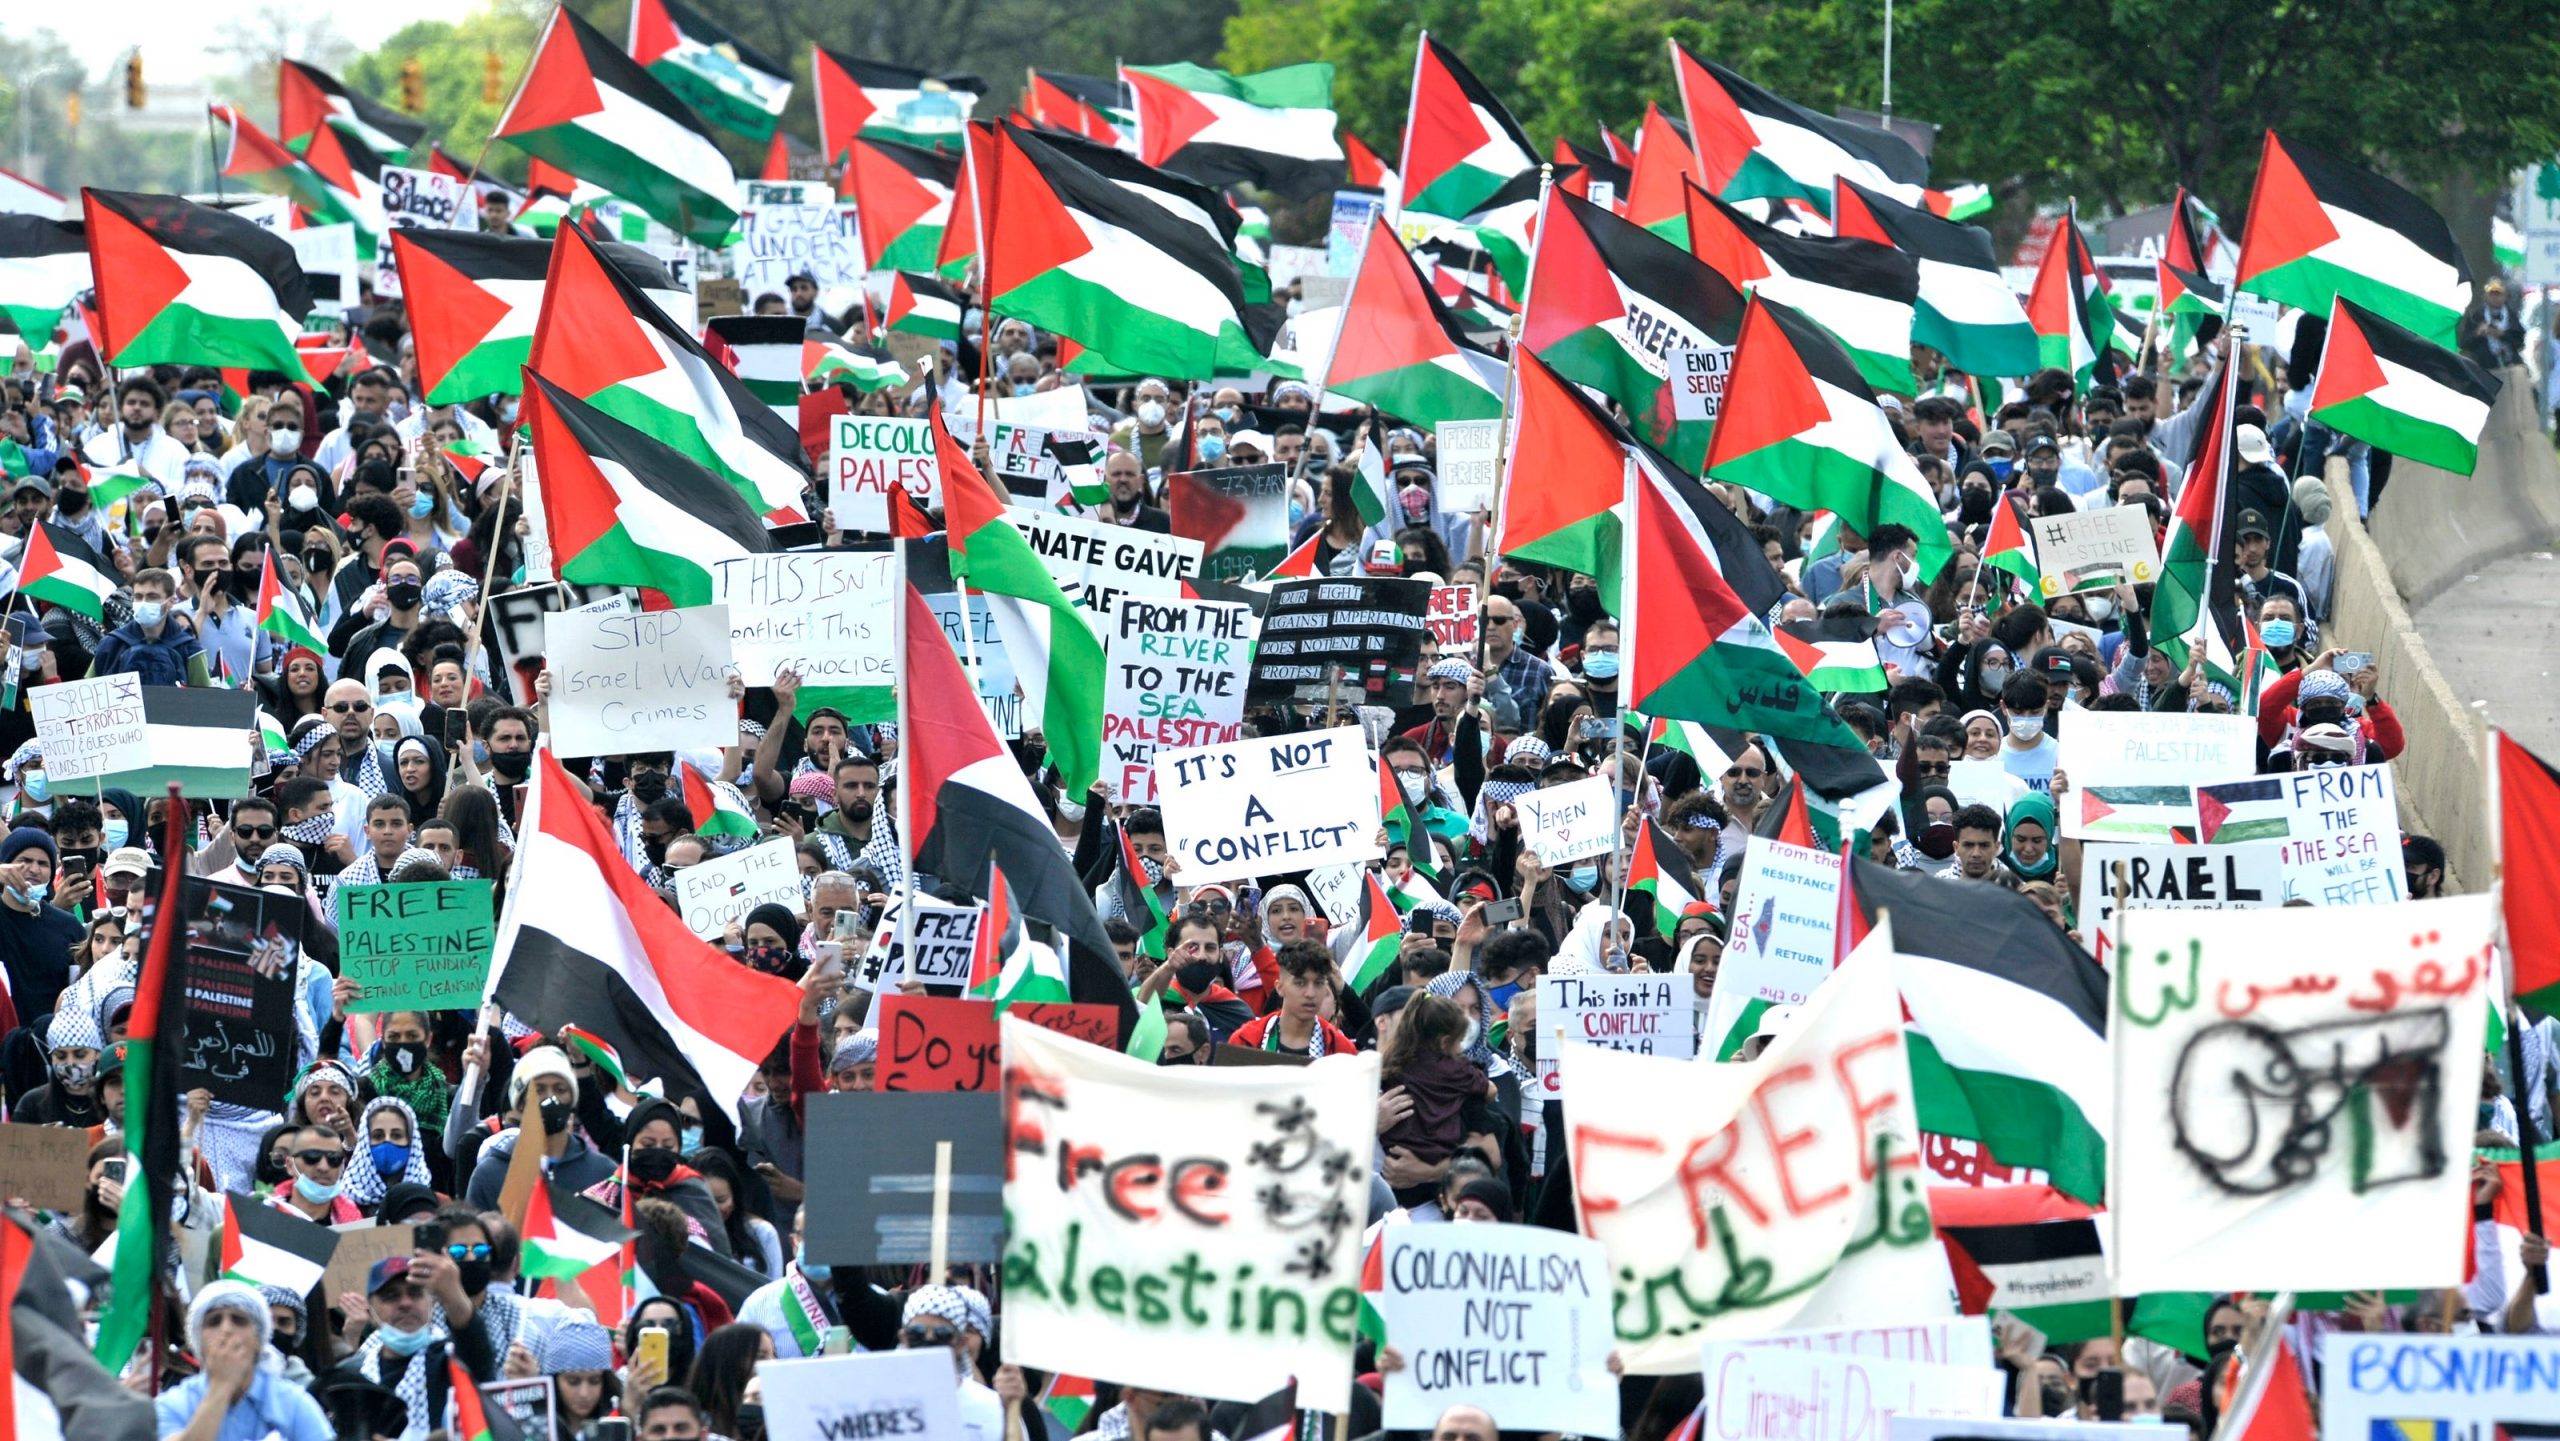 A crowd of protesters in Dearborn, Michigan protest Biden's visit, they hold Palestinian flags